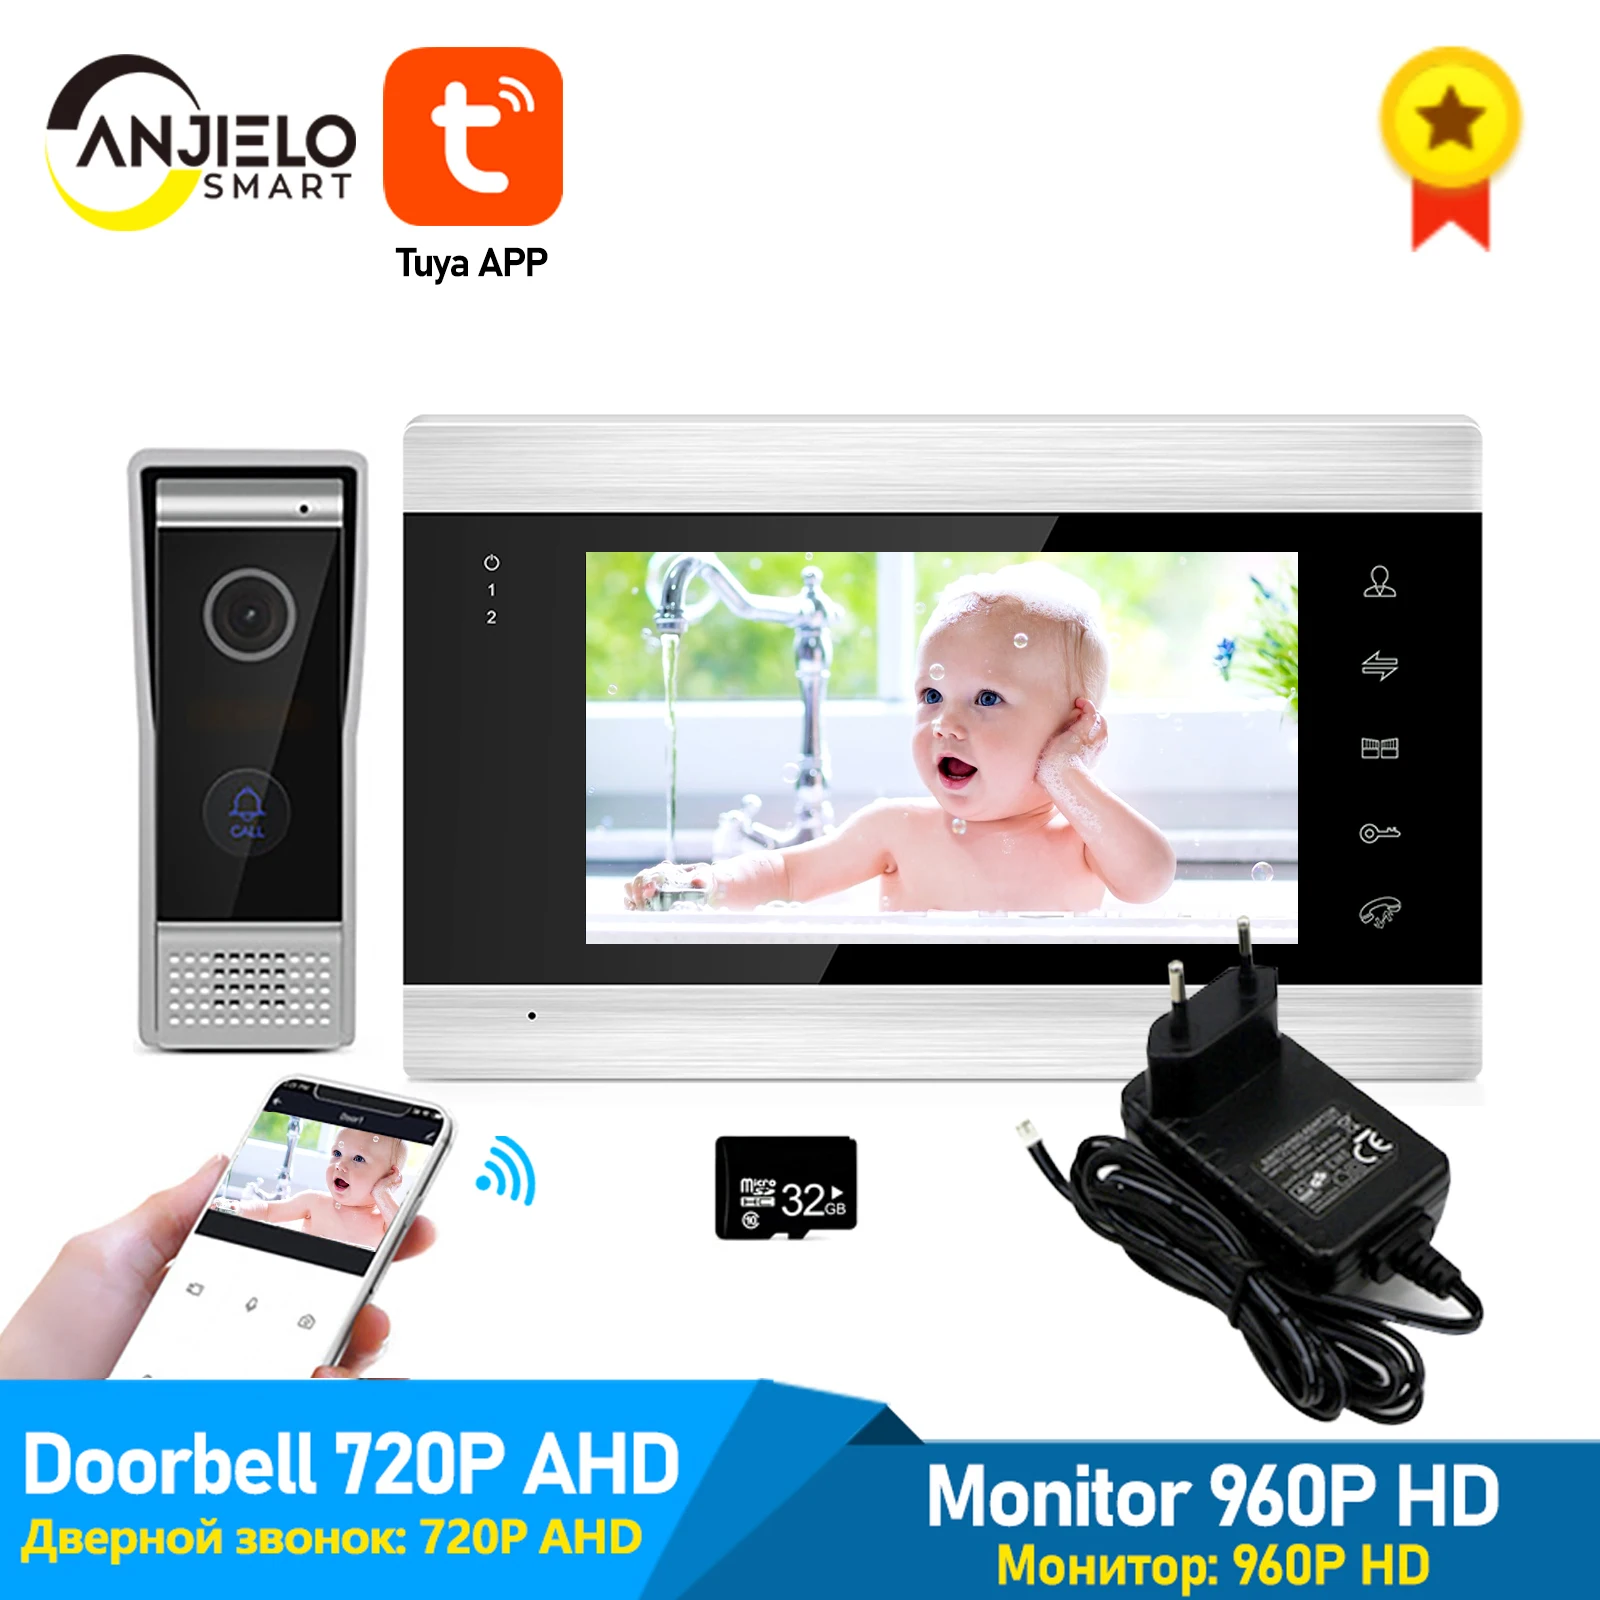 

WiFi Tuya Smart 7" Video Door Phone Intercom System with 720P/AHD Wired Doorbell Camera Remote Unlock Motion Detection For Home